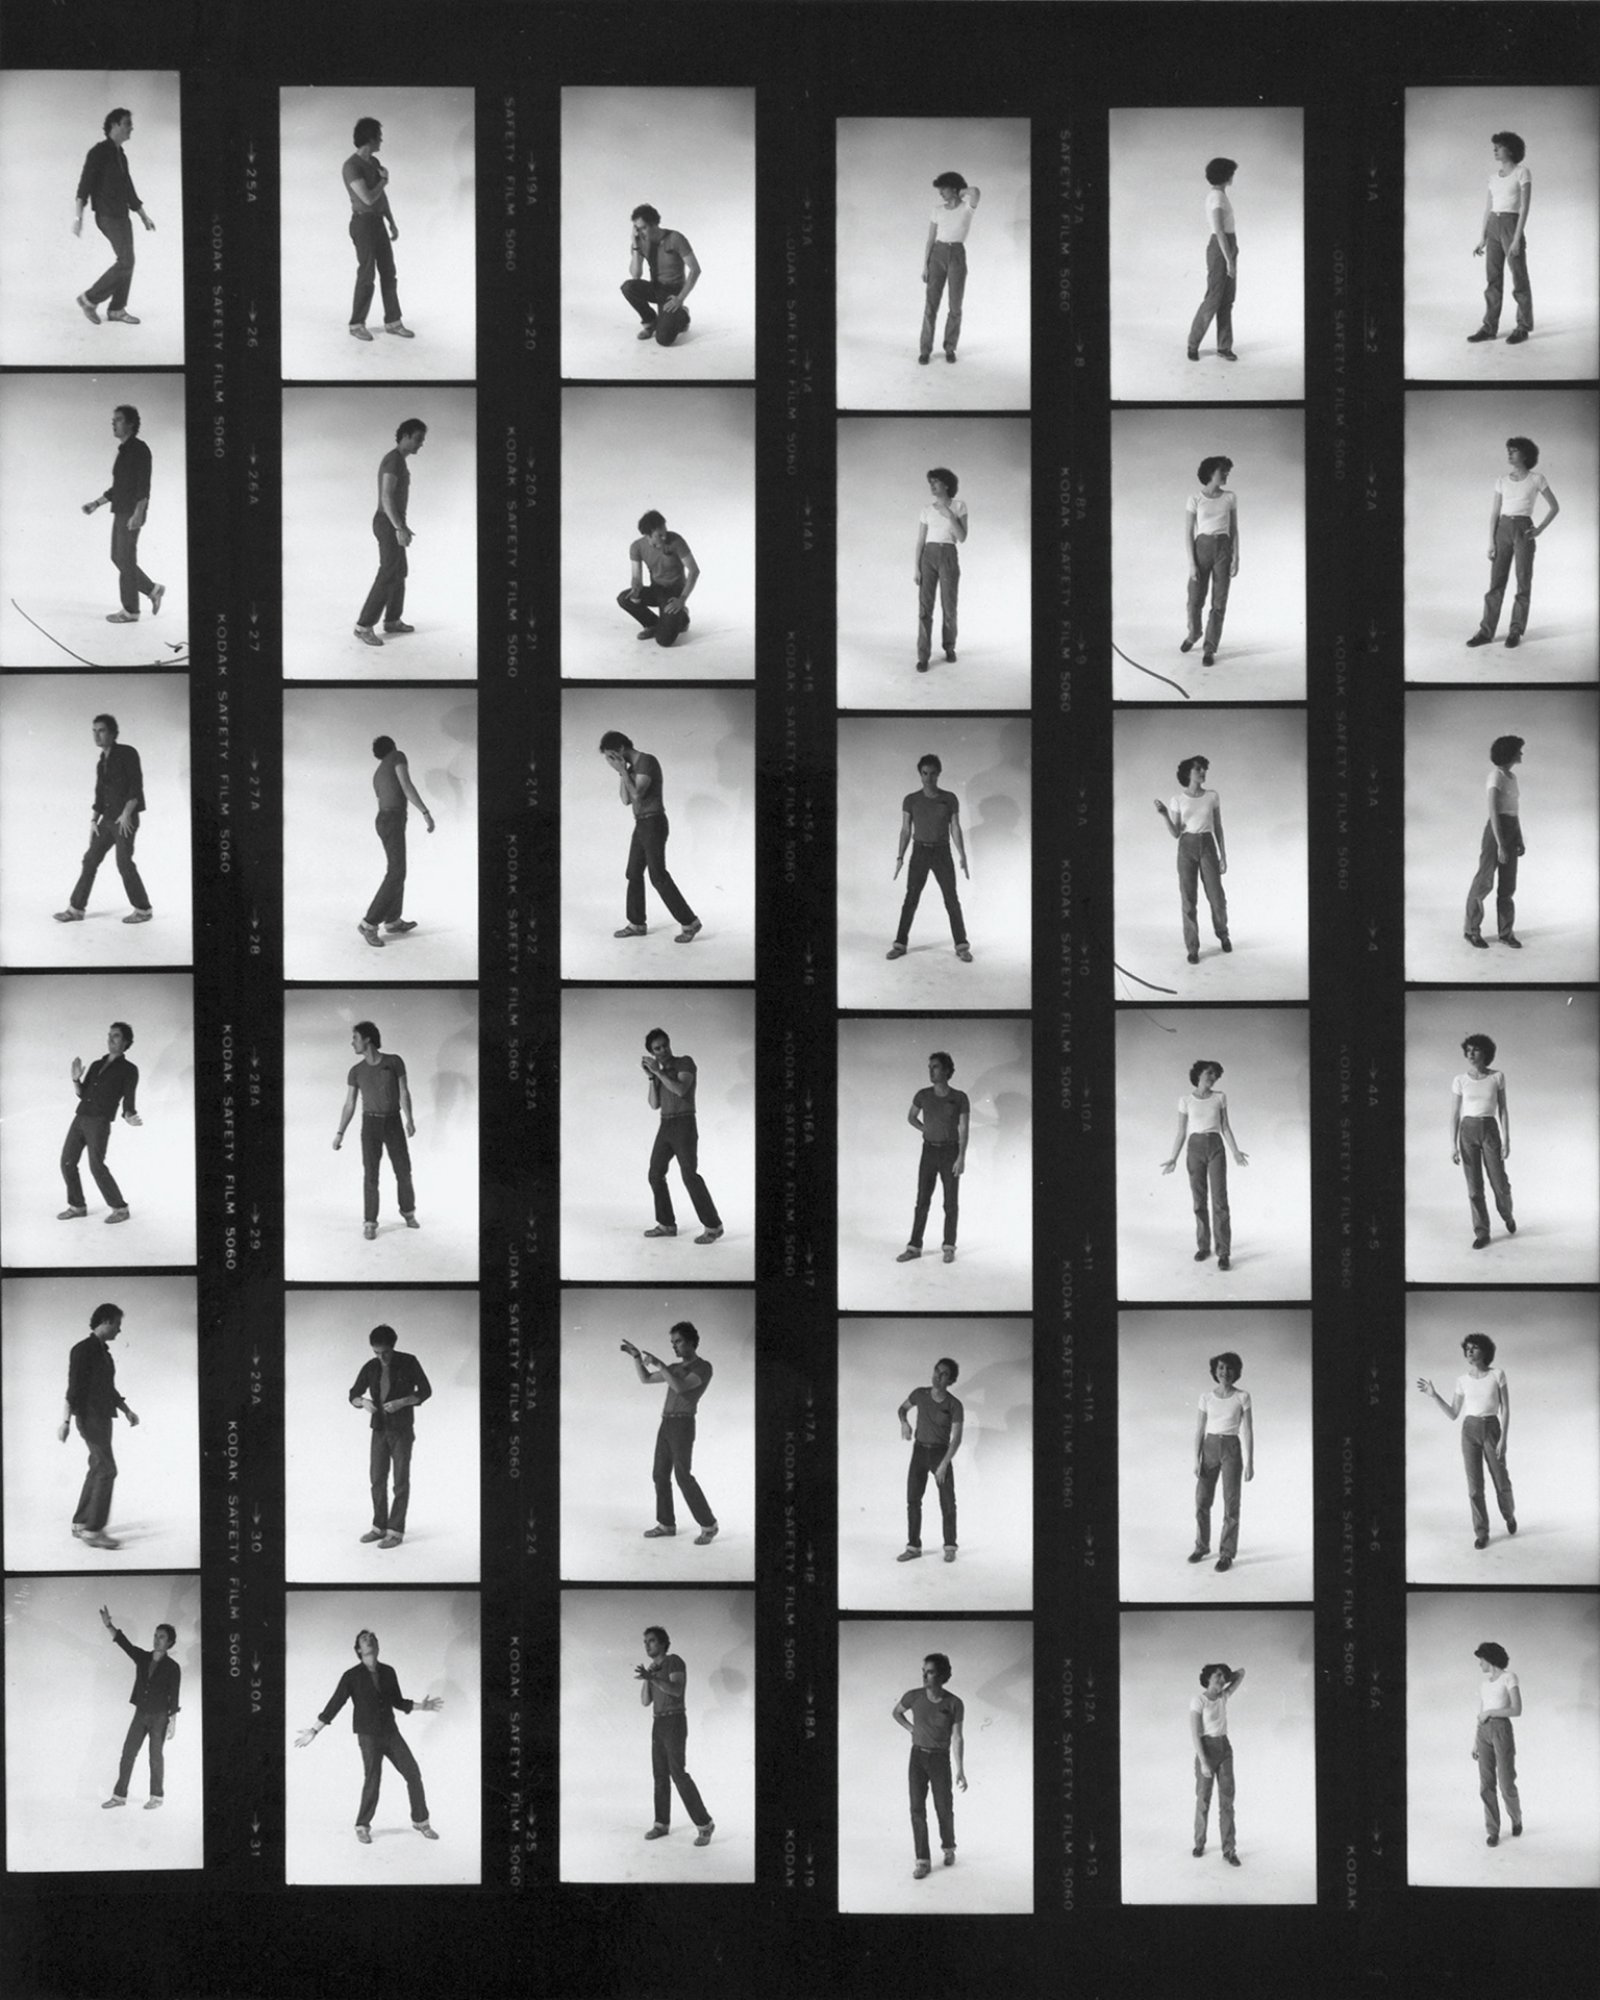 Ian Wallace, Contact sheets for Lookout, 1979, silver gelatin prints, 10 contact sheets, each 10 x 8 in. (25 x 20 cm)